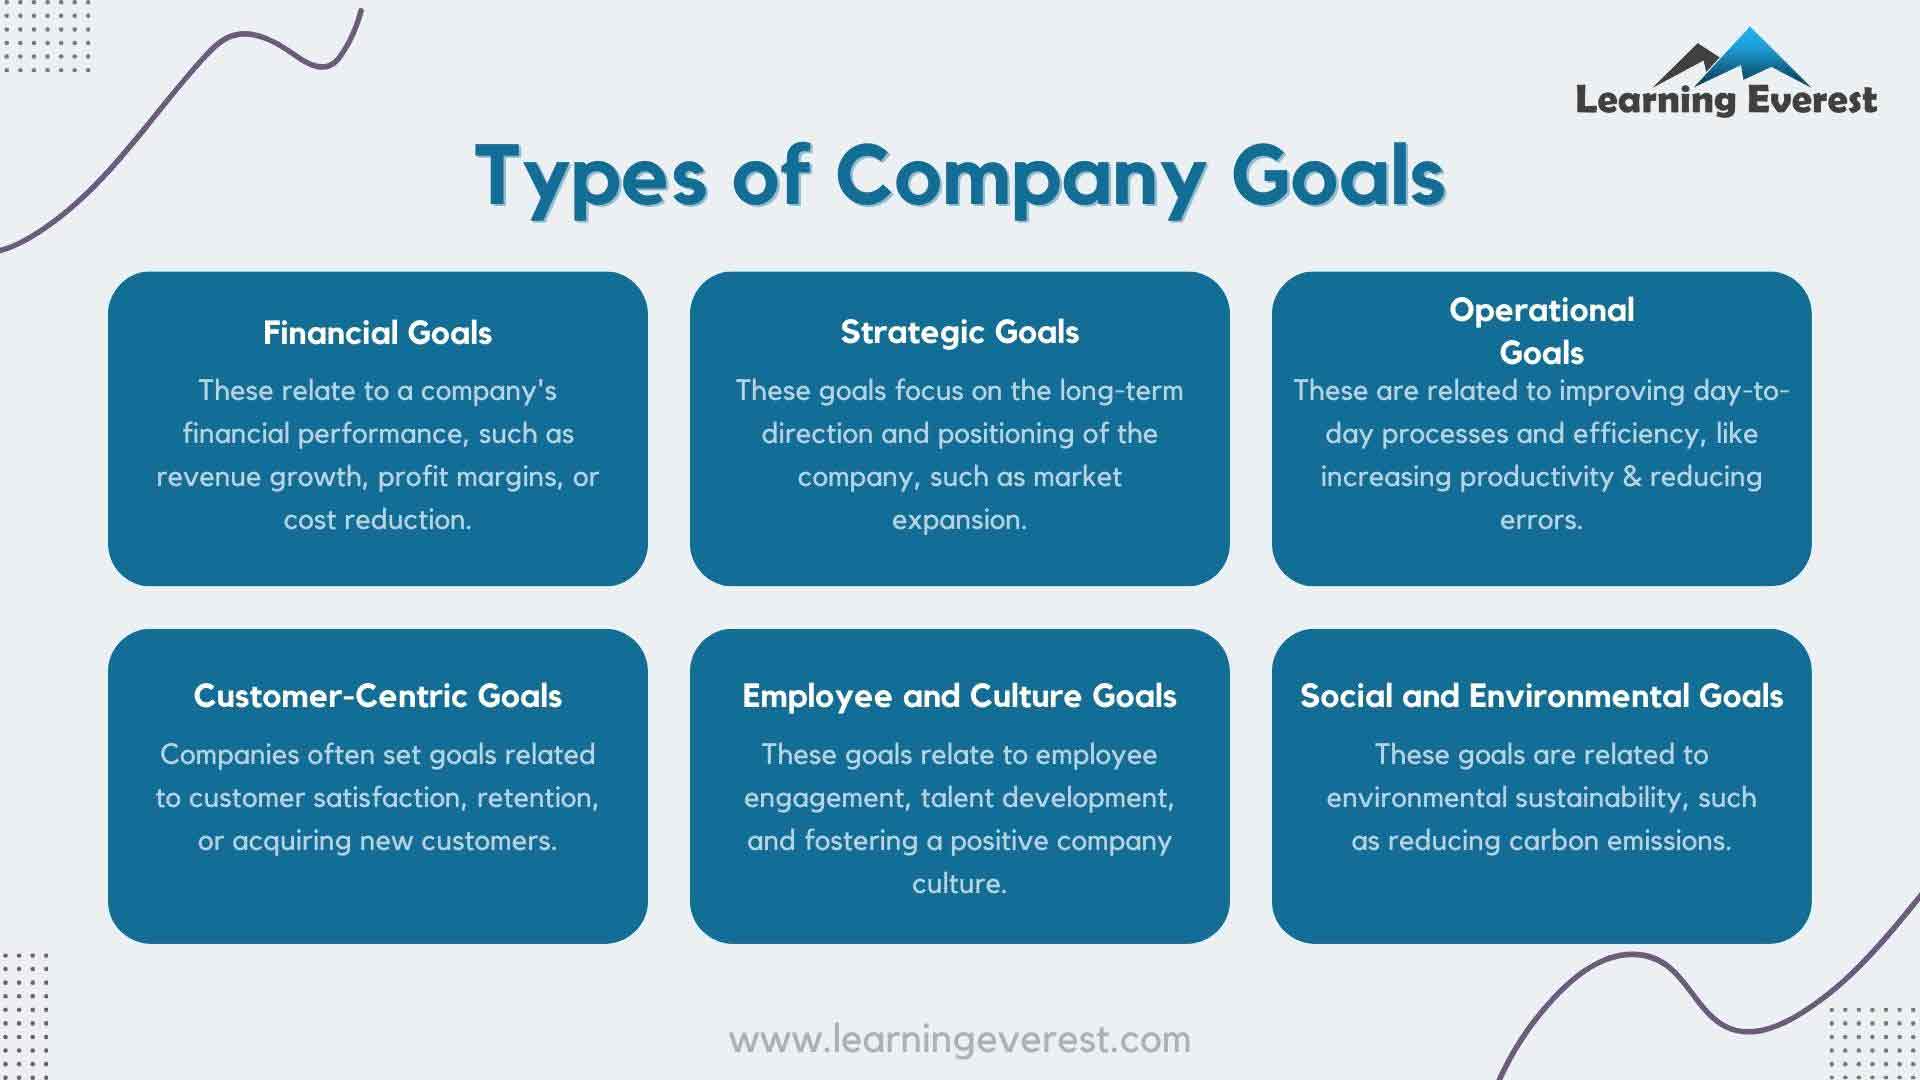 Guidelines for designing sales and marketing training module  - Research the company goals